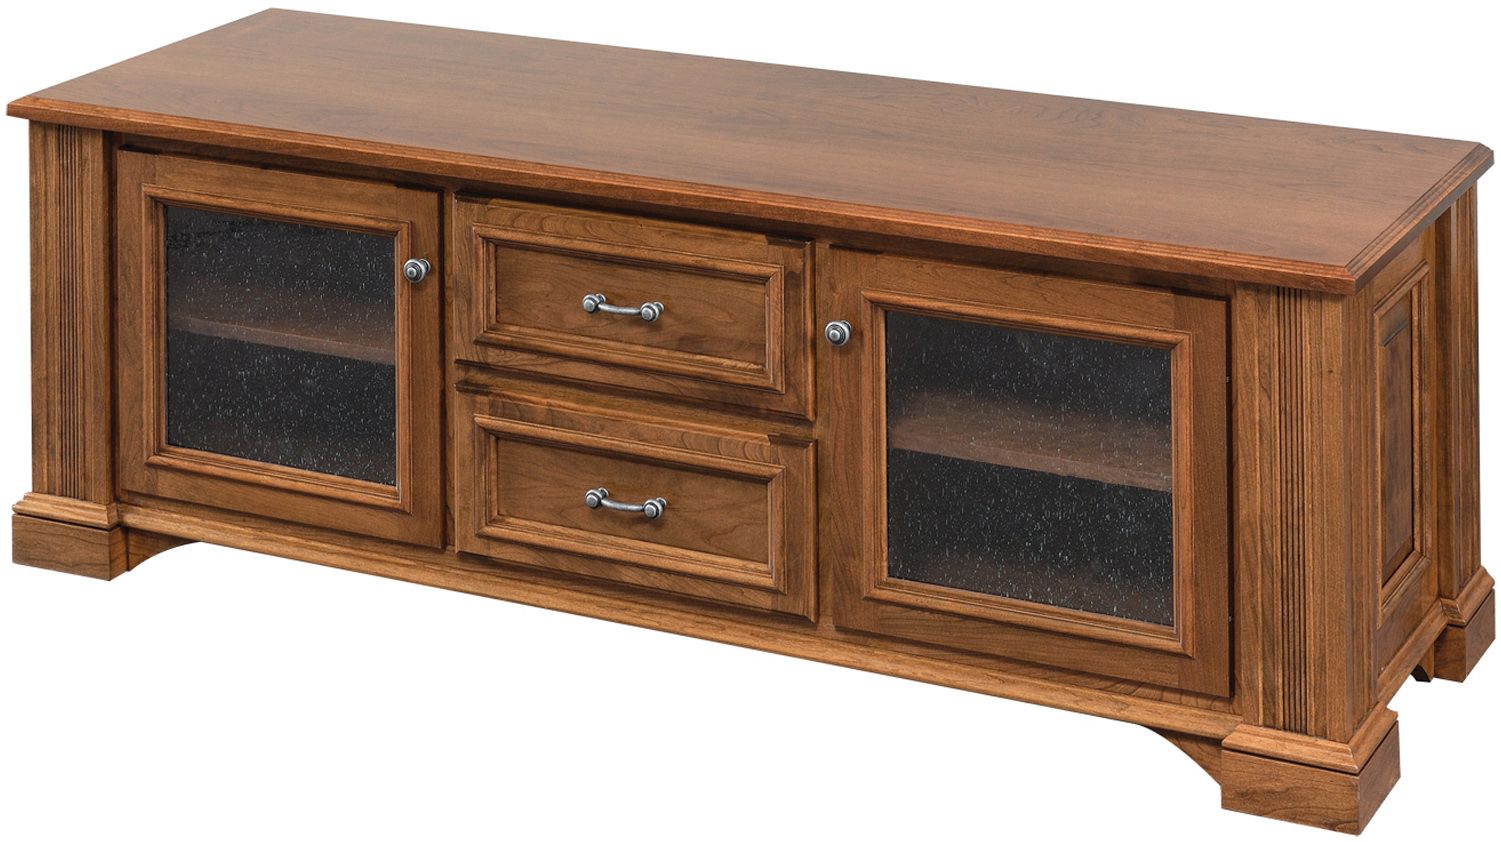 Lincoln Deluxe Plasma Tv Stand | Amish Solid Hardwood Tv With Regard To Dillon Tv Stands Oak (View 3 of 15)